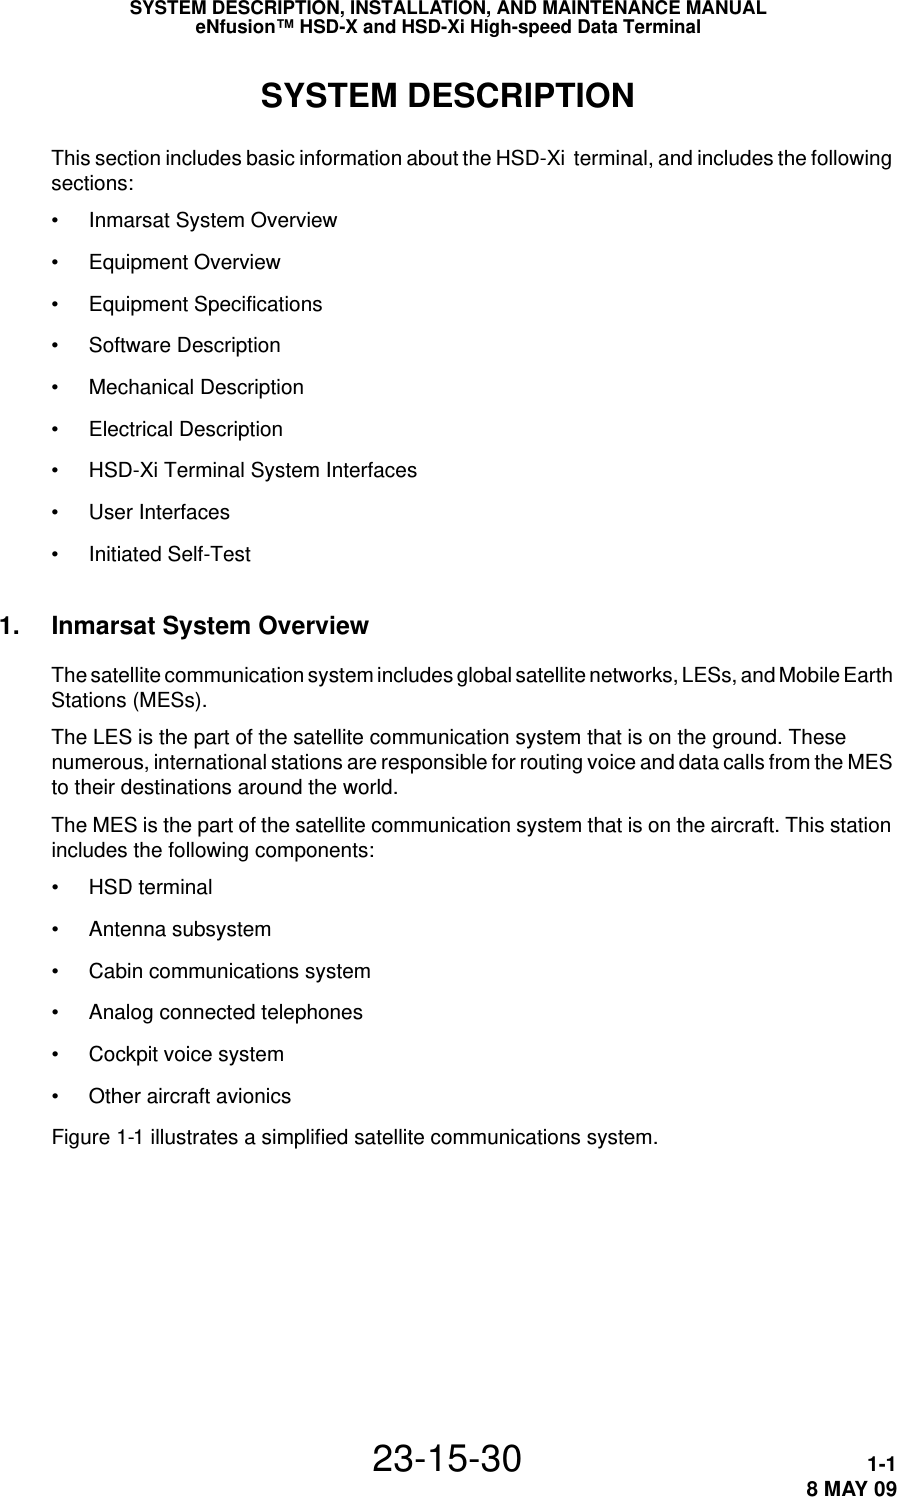 SYSTEM DESCRIPTION, INSTALLATION, AND MAINTENANCE MANUALeNfusion™ HSD-X and HSD-Xi High-speed Data Terminal23-15-30 1-18 MAY 09SYSTEM DESCRIPTIONThis section includes basic information about the HSD-Xi  terminal, and includes the following sections:•Inmarsat System Overview•Equipment Overview•Equipment Specifications•Software Description•Mechanical Description•Electrical Description•HSD-Xi Terminal System Interfaces•User Interfaces•Initiated Self-Test1. Inmarsat System OverviewThe satellite communication system includes global satellite networks, LESs, and Mobile Earth Stations (MESs).The LES is the part of the satellite communication system that is on the ground. These numerous, international stations are responsible for routing voice and data calls from the MES to their destinations around the world. The MES is the part of the satellite communication system that is on the aircraft. This station includes the following components:•HSD terminal• Antenna subsystem• Cabin communications system• Analog connected telephones• Cockpit voice system• Other aircraft avionicsFigure 1-1 illustrates a simplified satellite communications system.